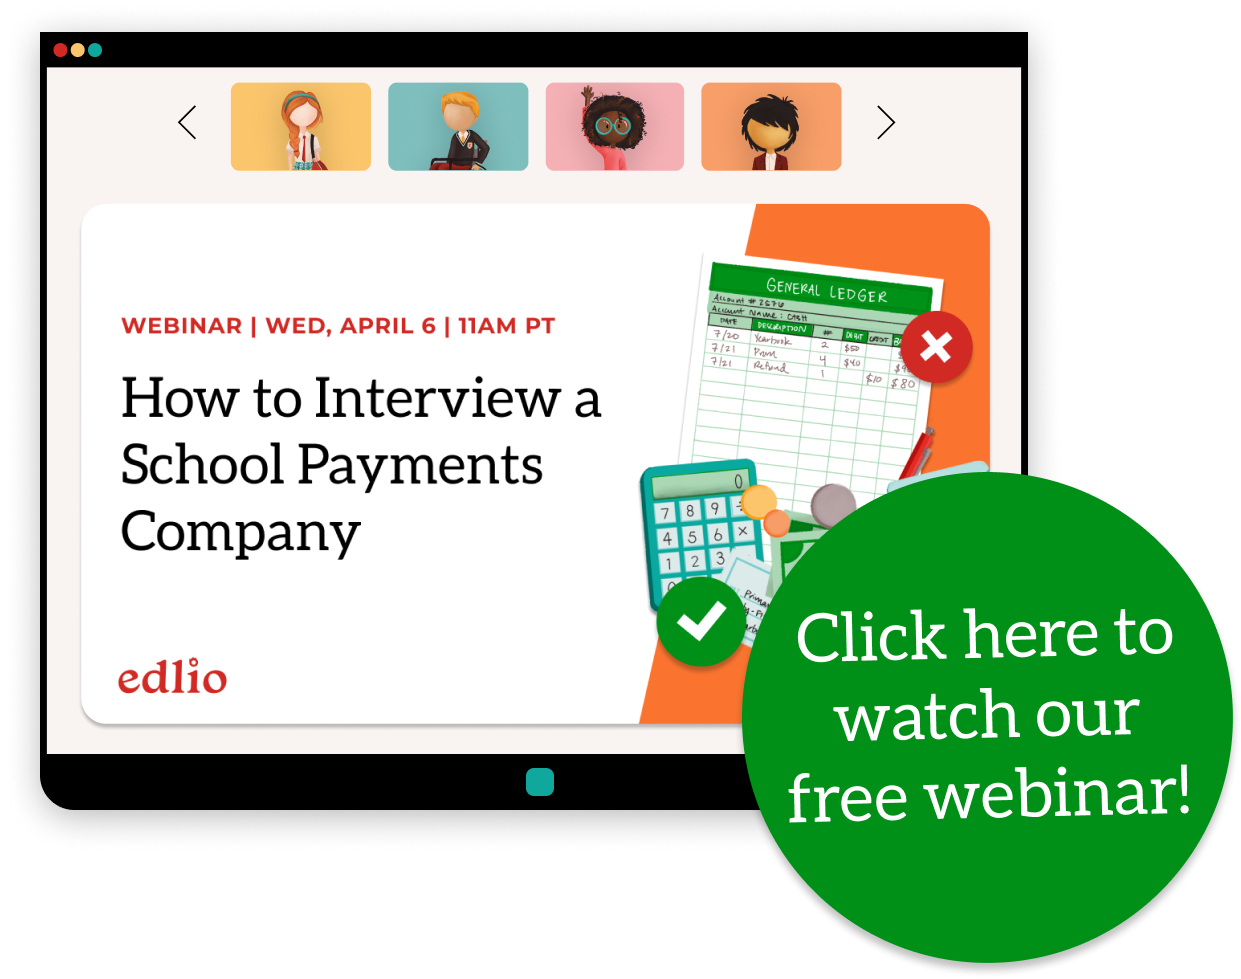 Click here to watch our Webinar on How to Interview an Online School Payments Company!